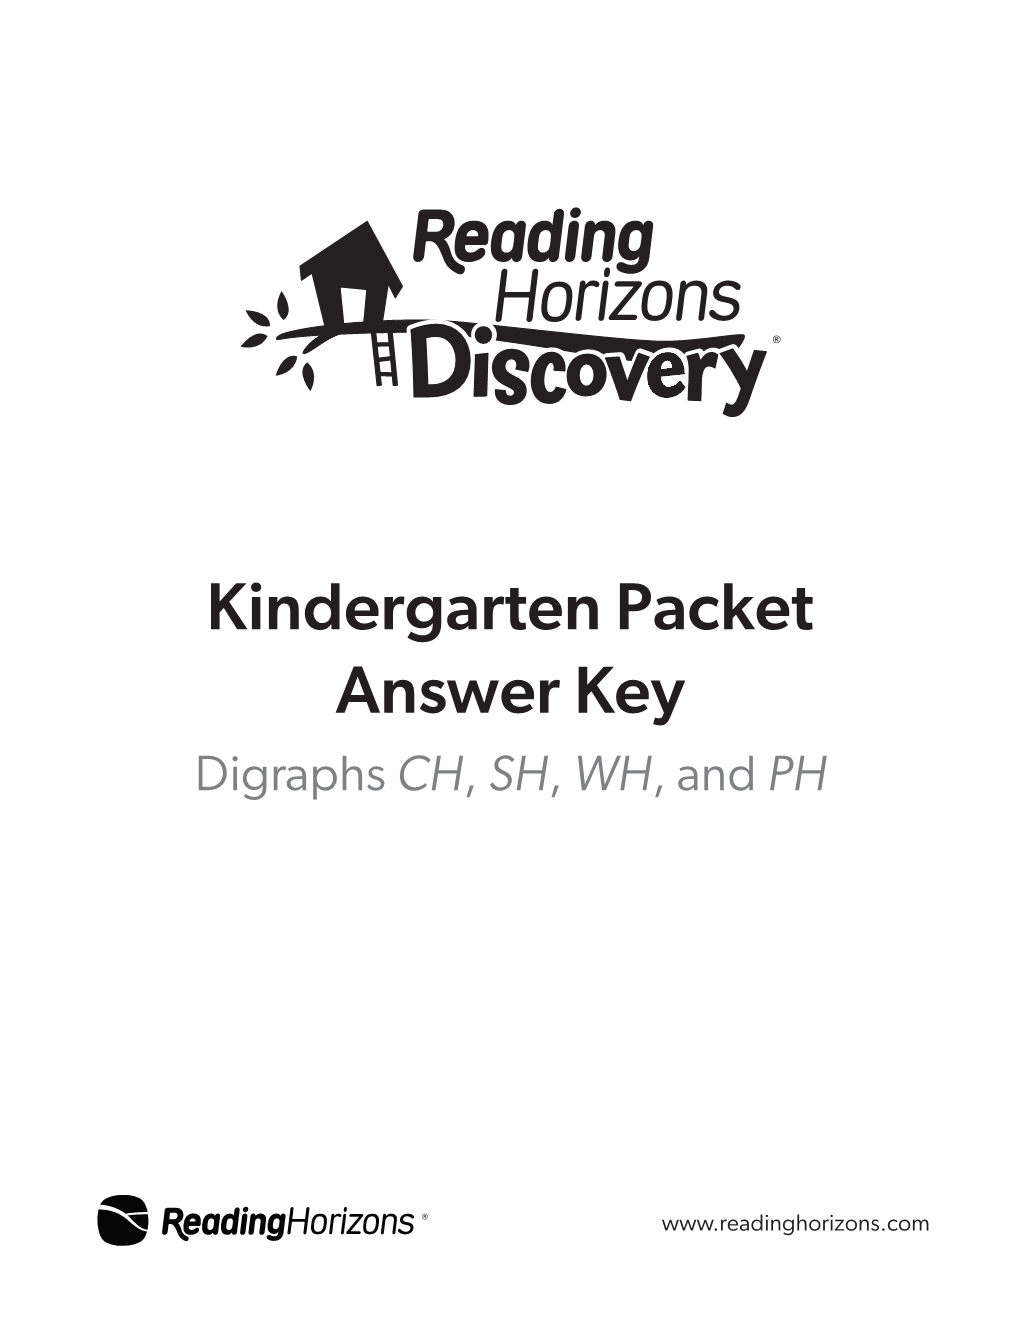 Kindergarten Packet Answer Key Digraphs CH, SH, WH, and PH